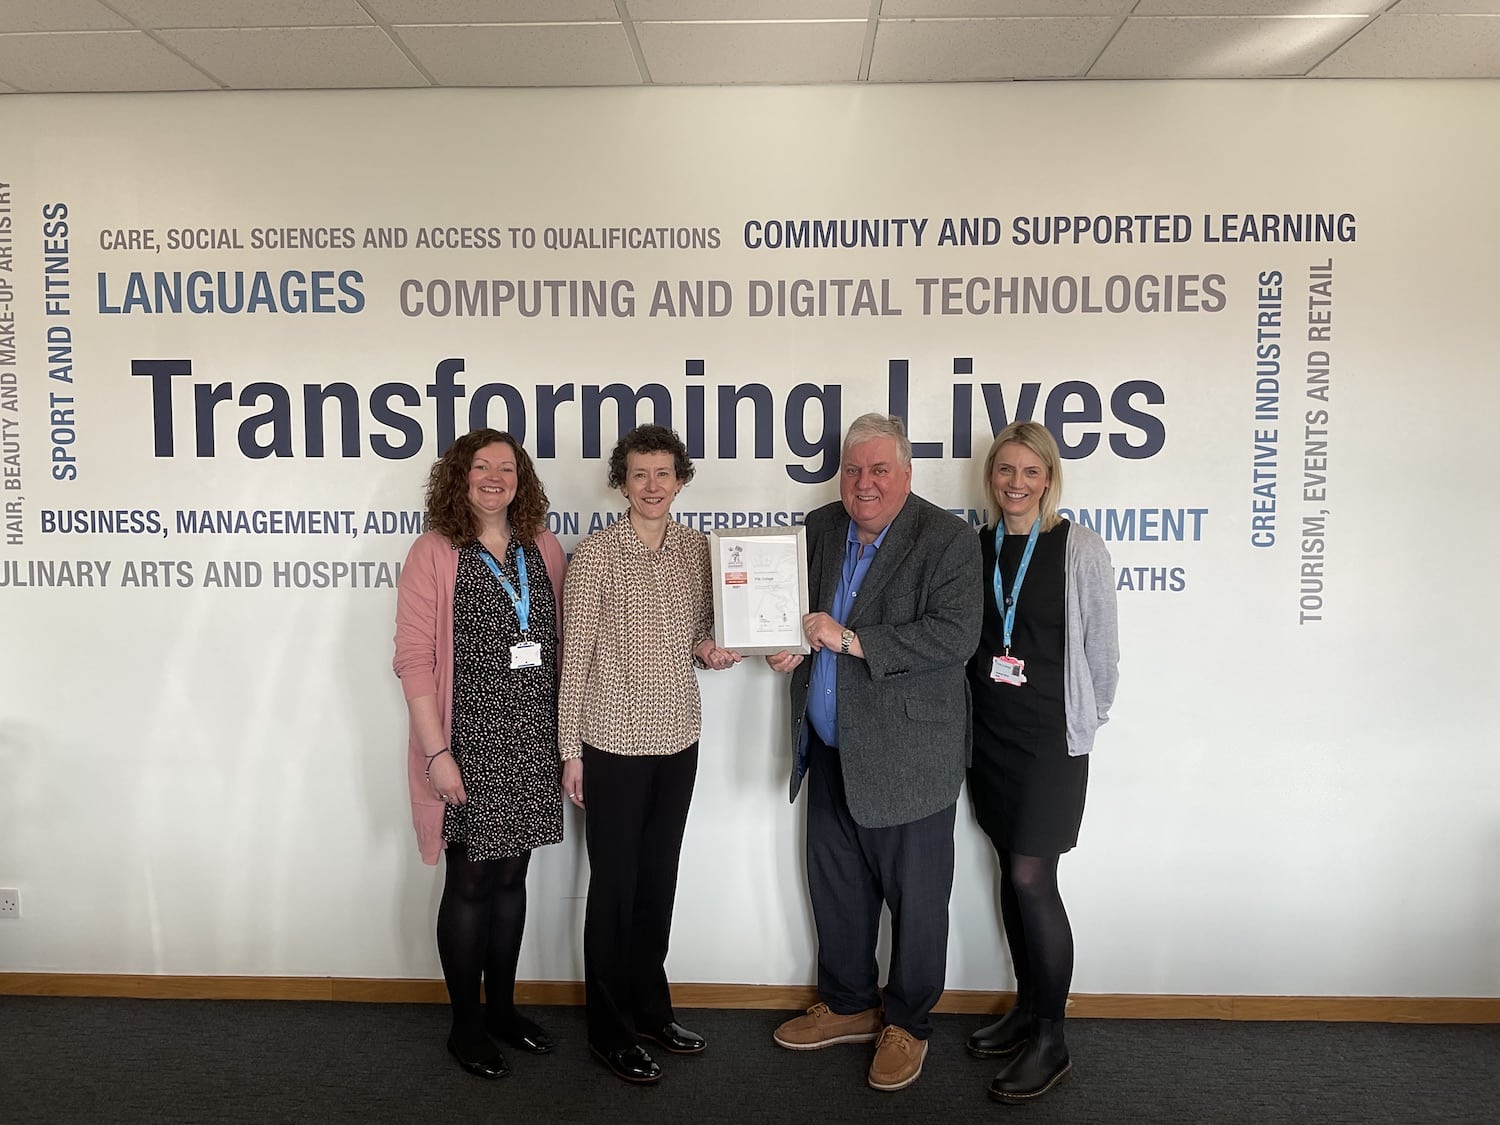 Receiving the award from Roy McLellan on behalf of the college were (main picture, from left) Stefanie Sloan HR Assistant, Zelda Franklin-Hills Director Organisational development & HR, and Allyson Chernouski HR Assistant.